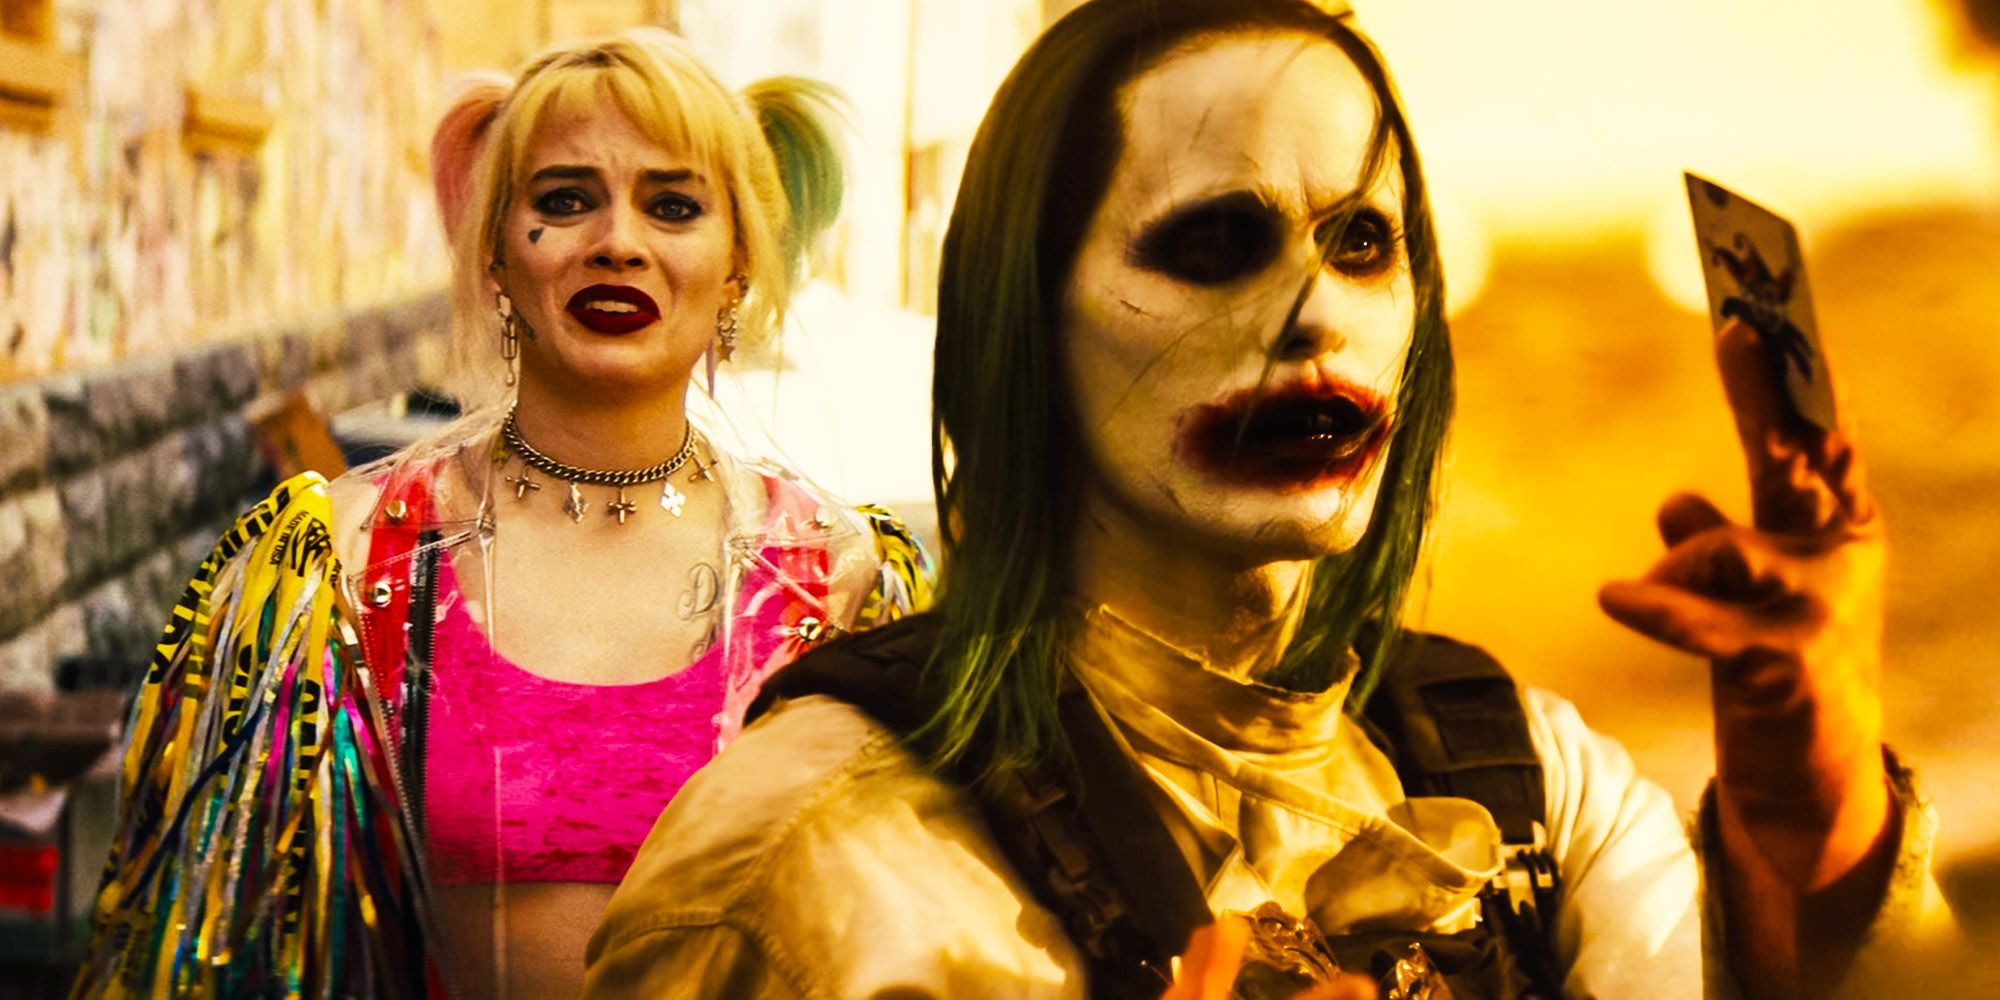 Margot Robbie as Harley Quinn and Jared Leto as the Joker